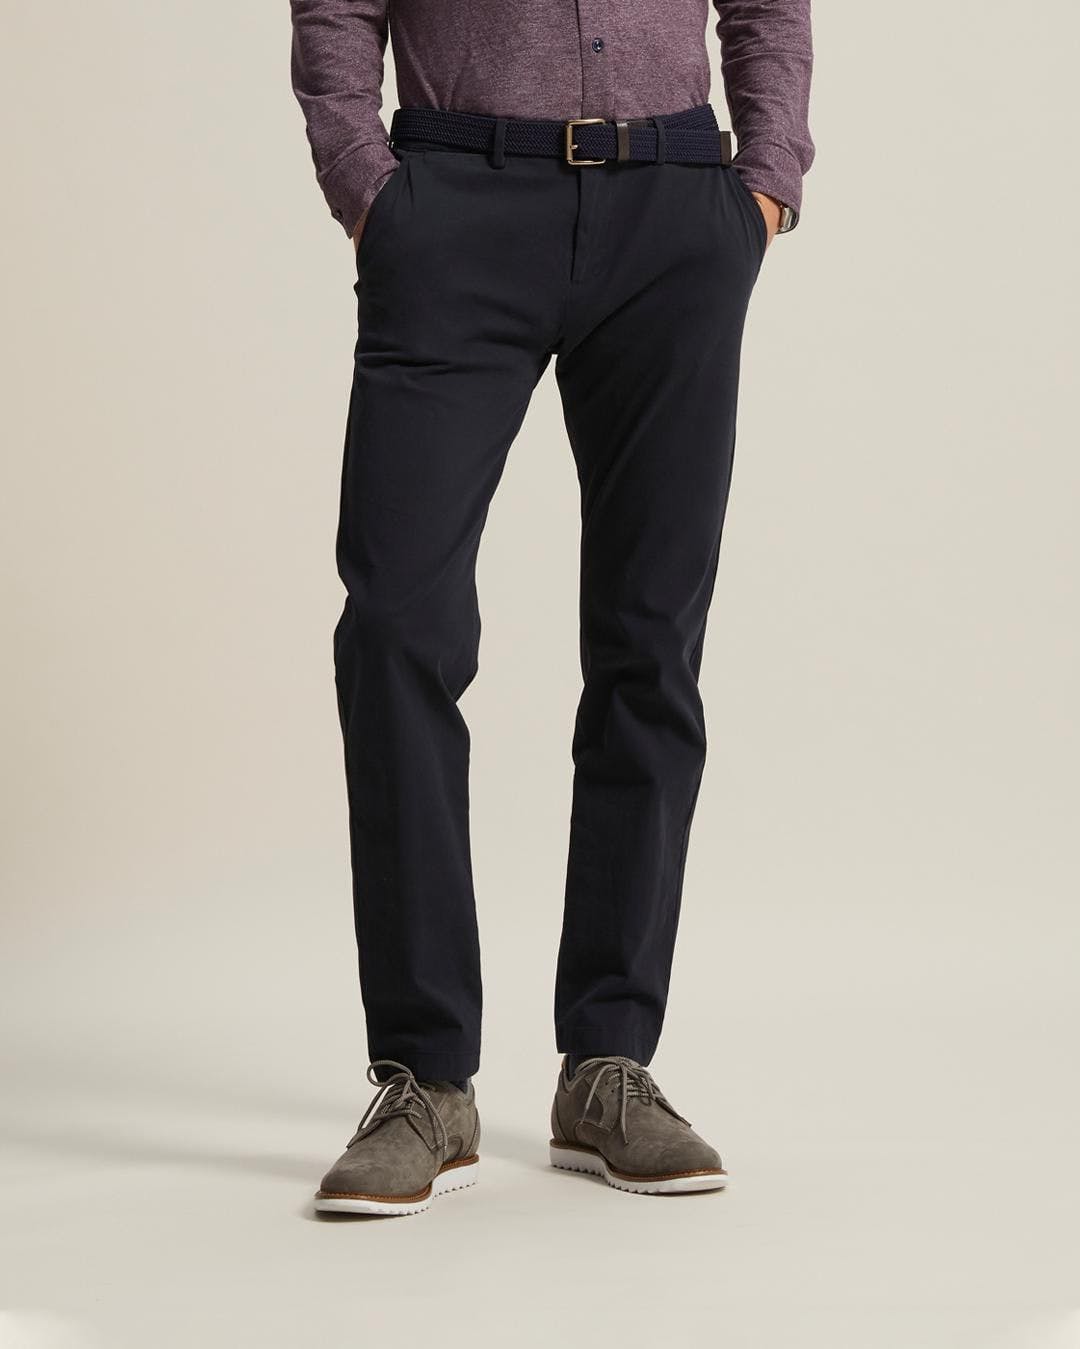 Dockers Pants for Men  Pants  Moores Clothing